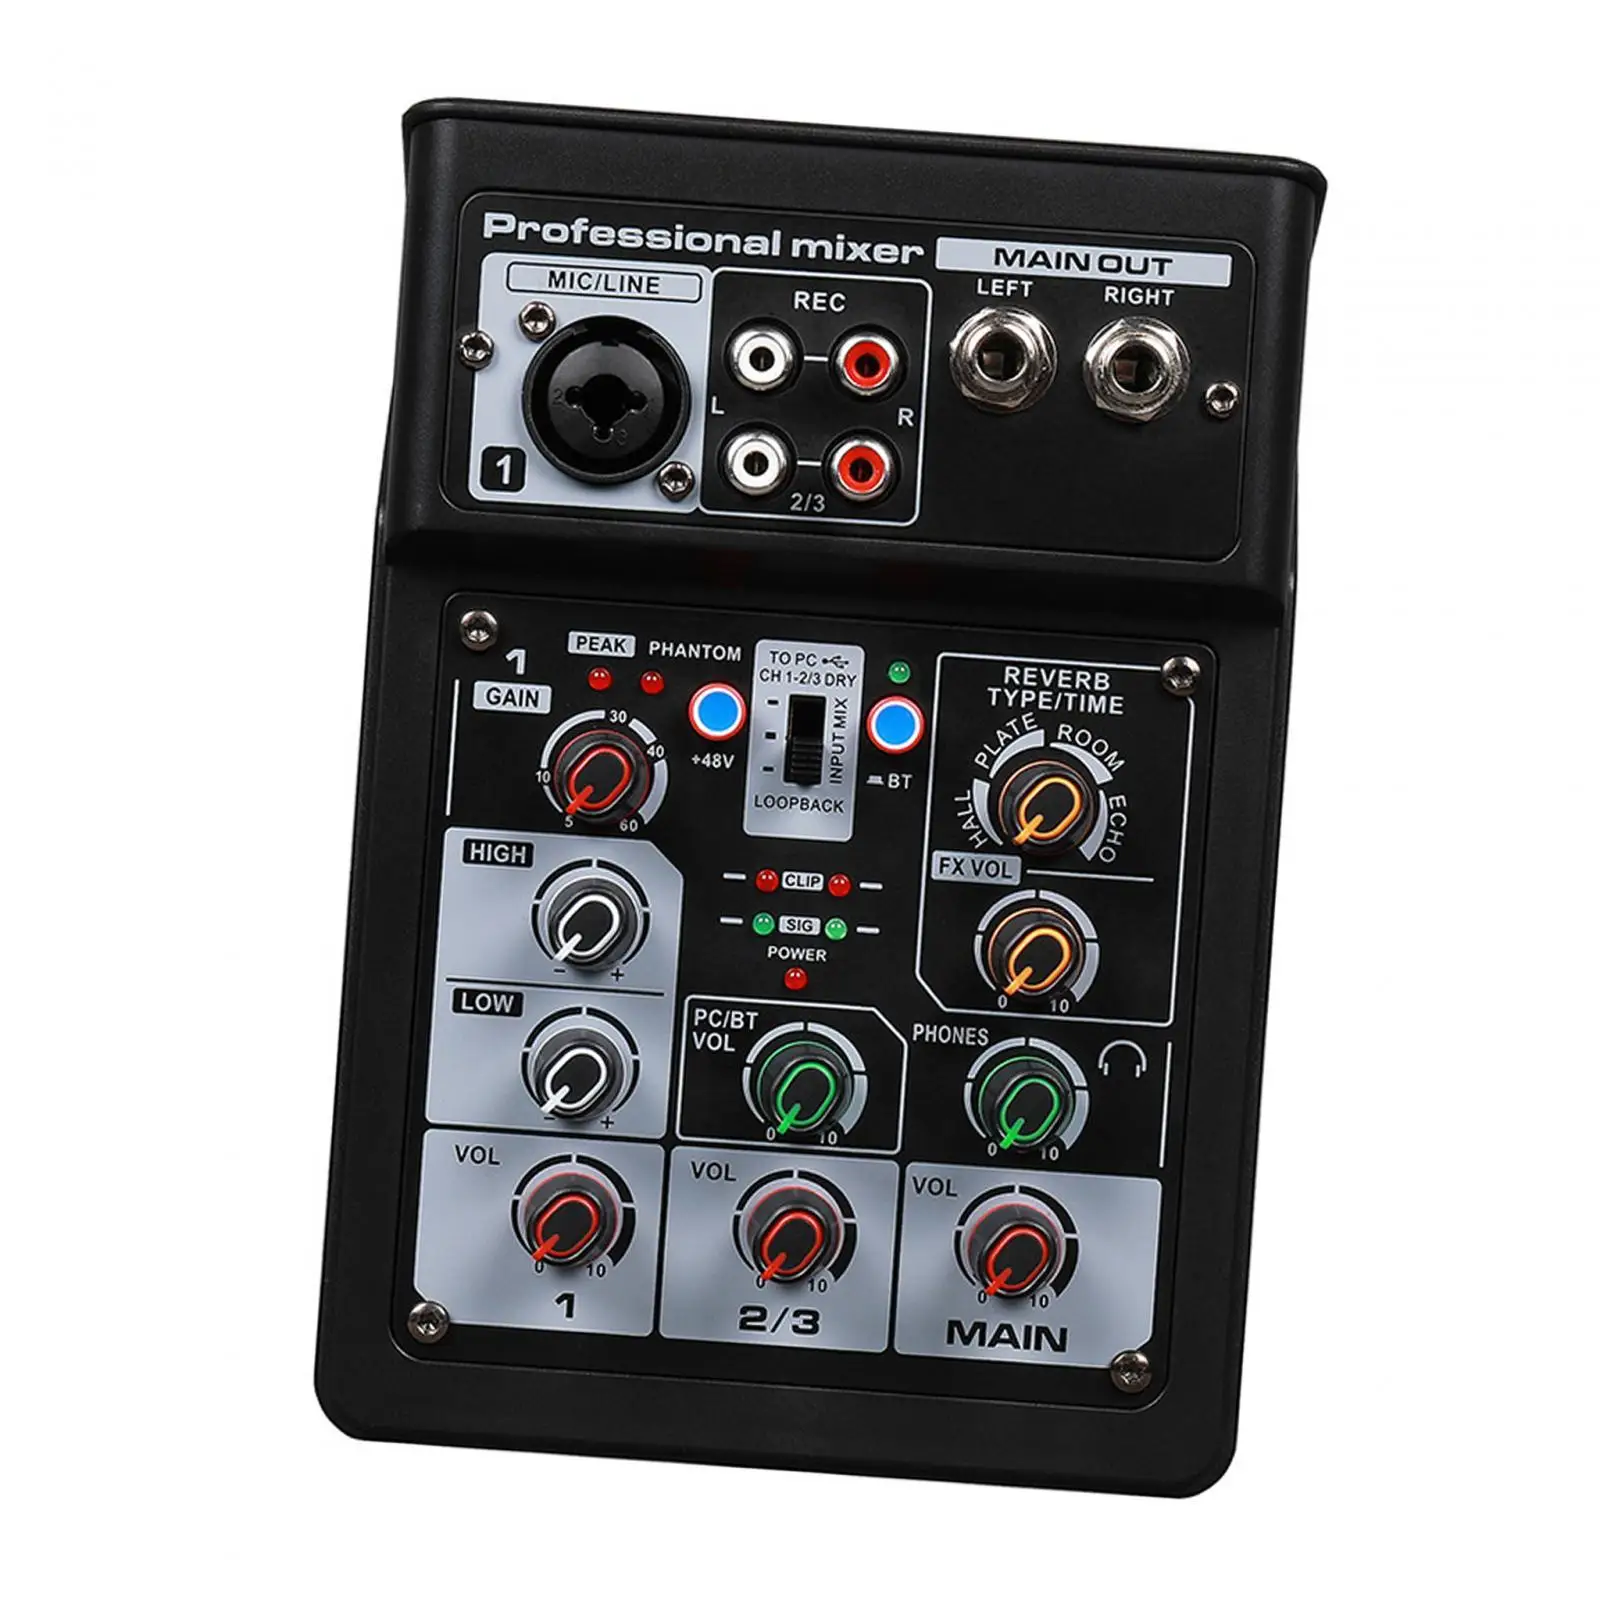 Audio Mixer Reverb DJ Controller with Effects 48V Power Digital Stereo Mixer for PC Sound Card KTV Live Streaming Home